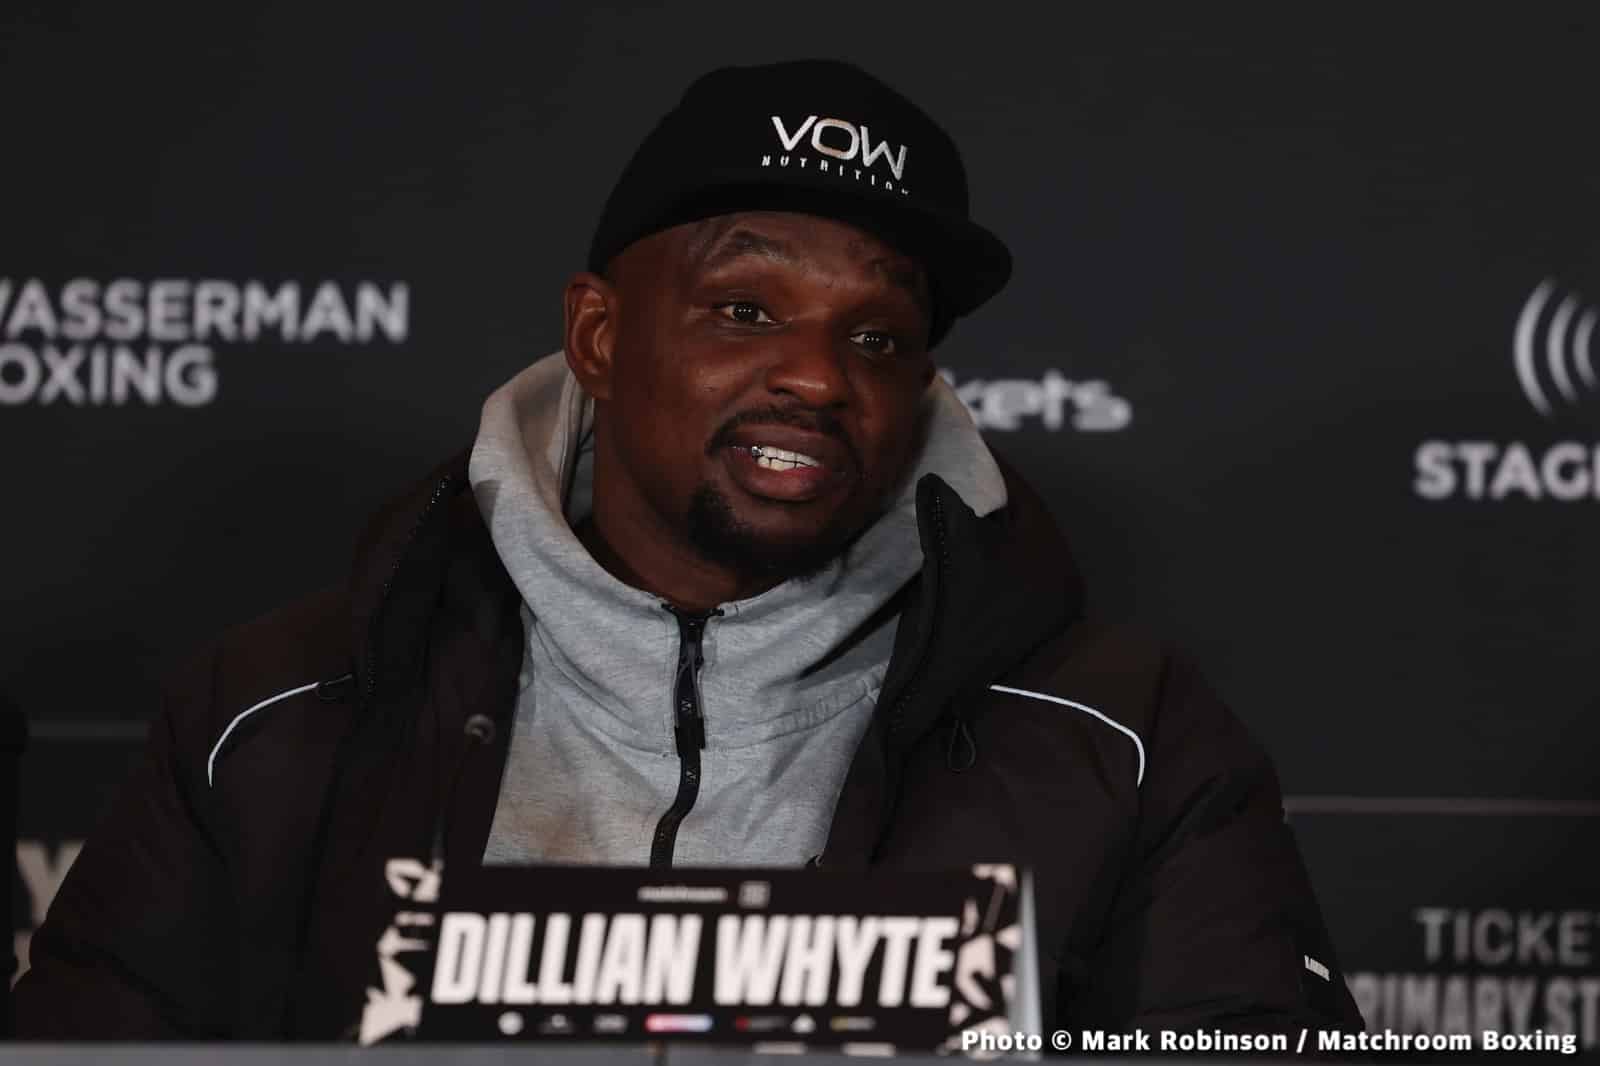 Whyte vs Franklin DAZN Weigh In Results